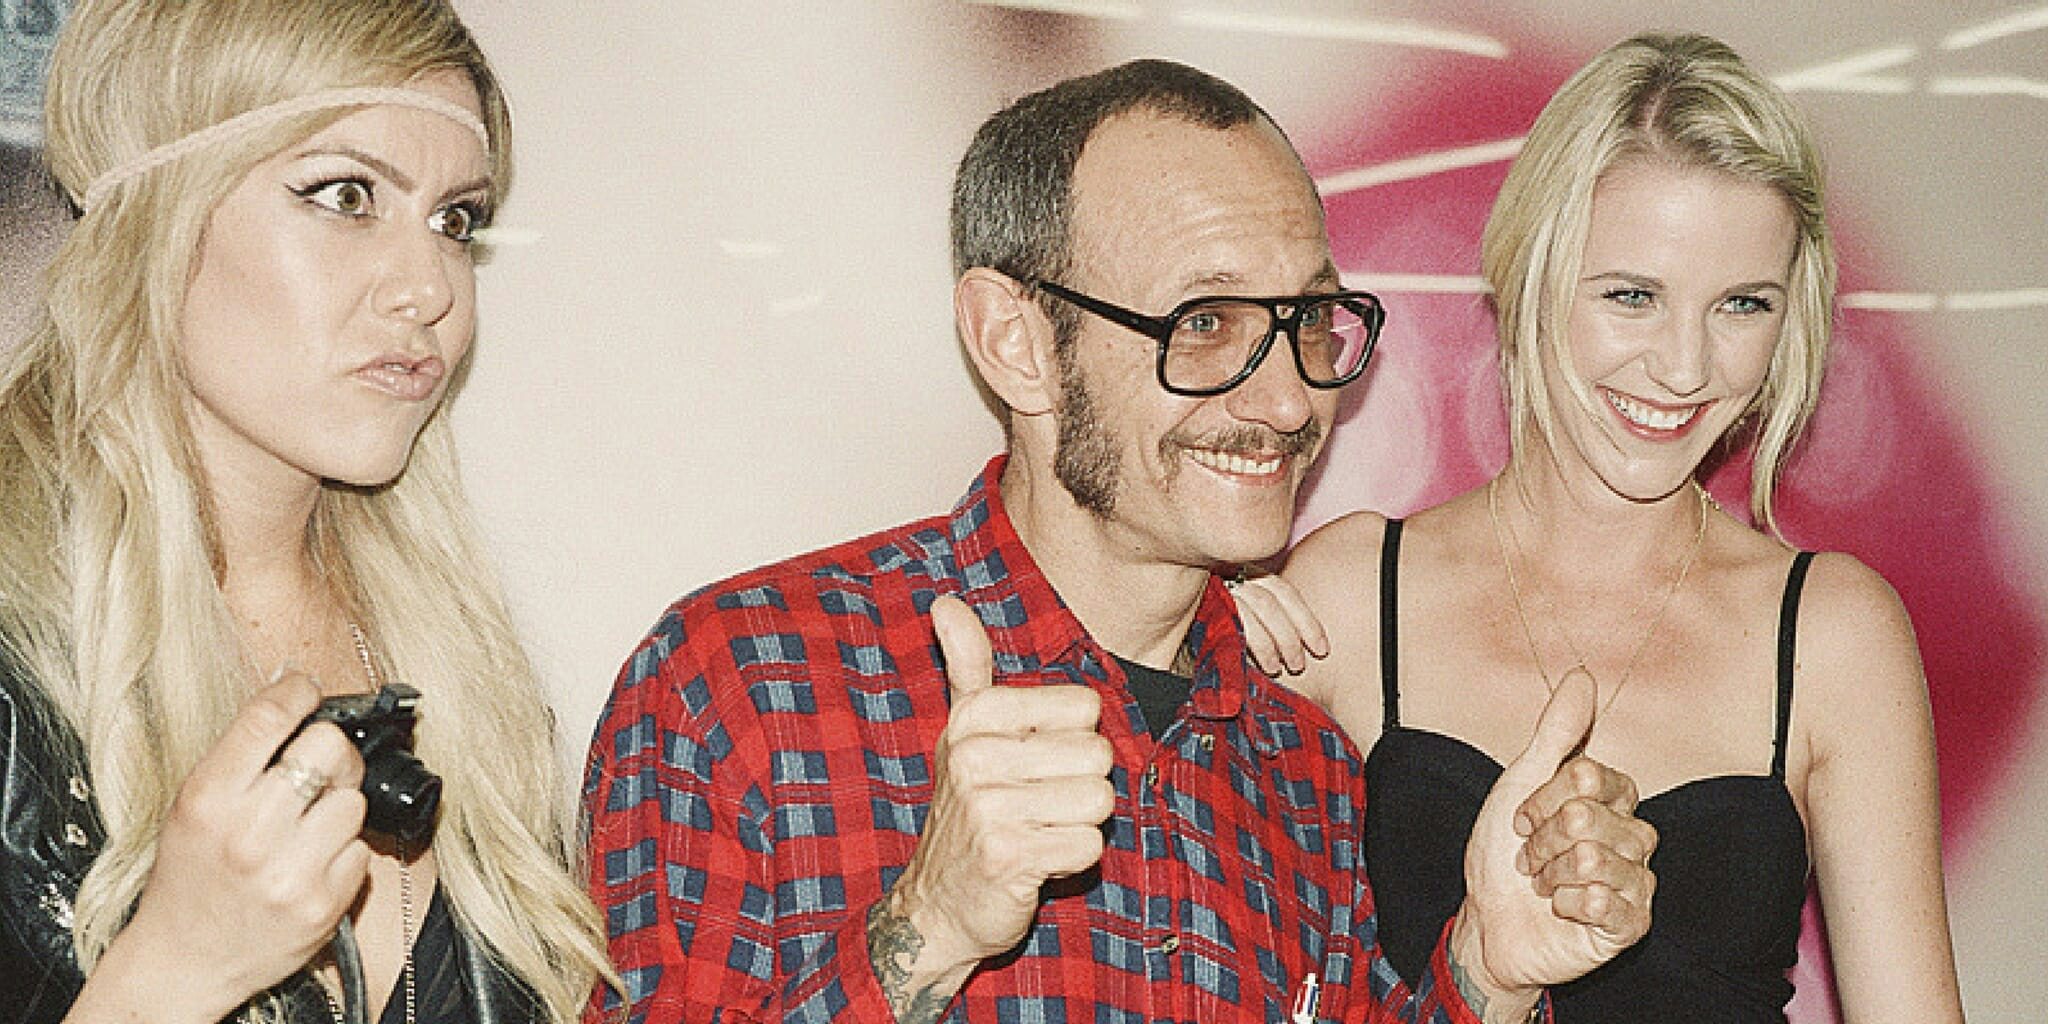 craig childress recommends terry richardson sex video pic